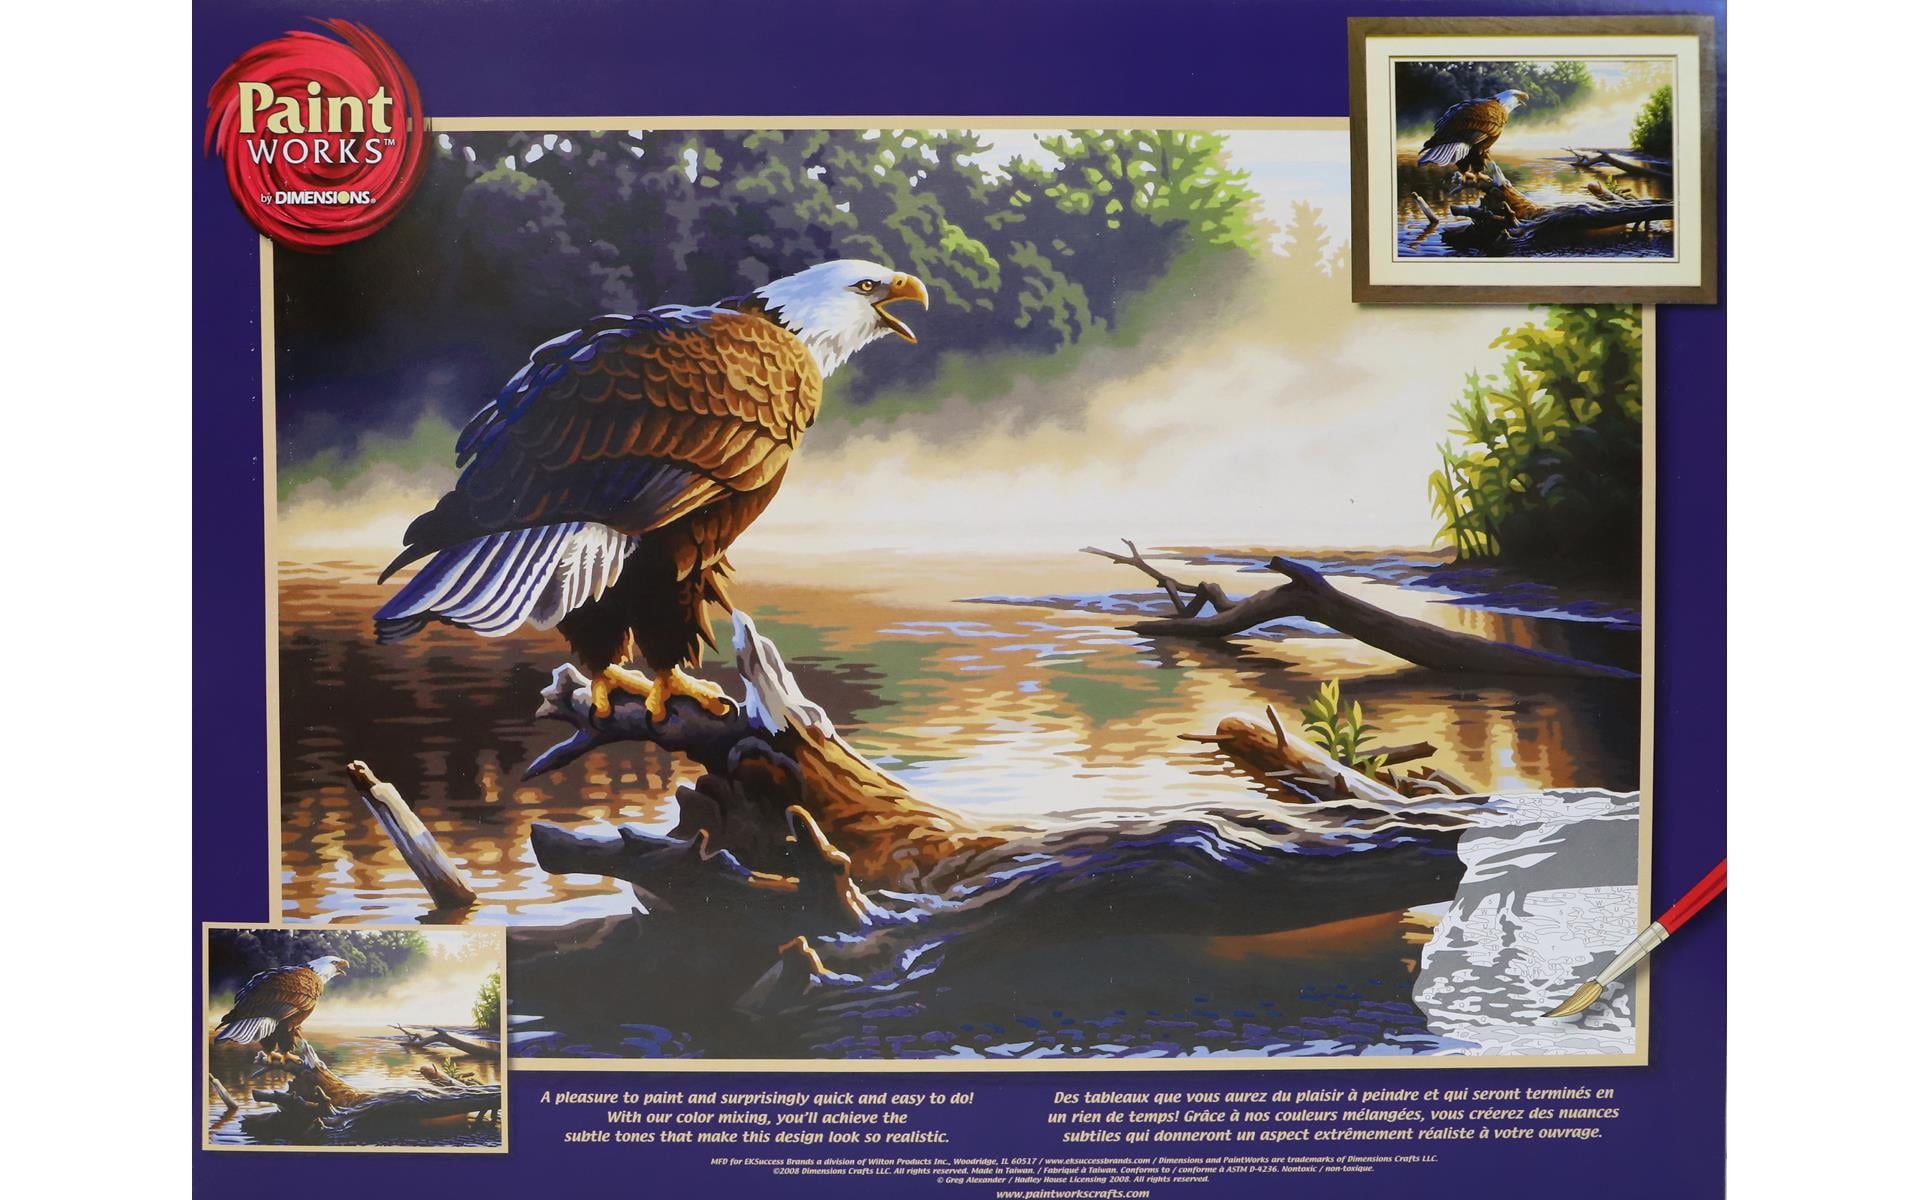 Paint Works Paint By Number Kit 20 x 14 - Eagle Hunter - 9954334